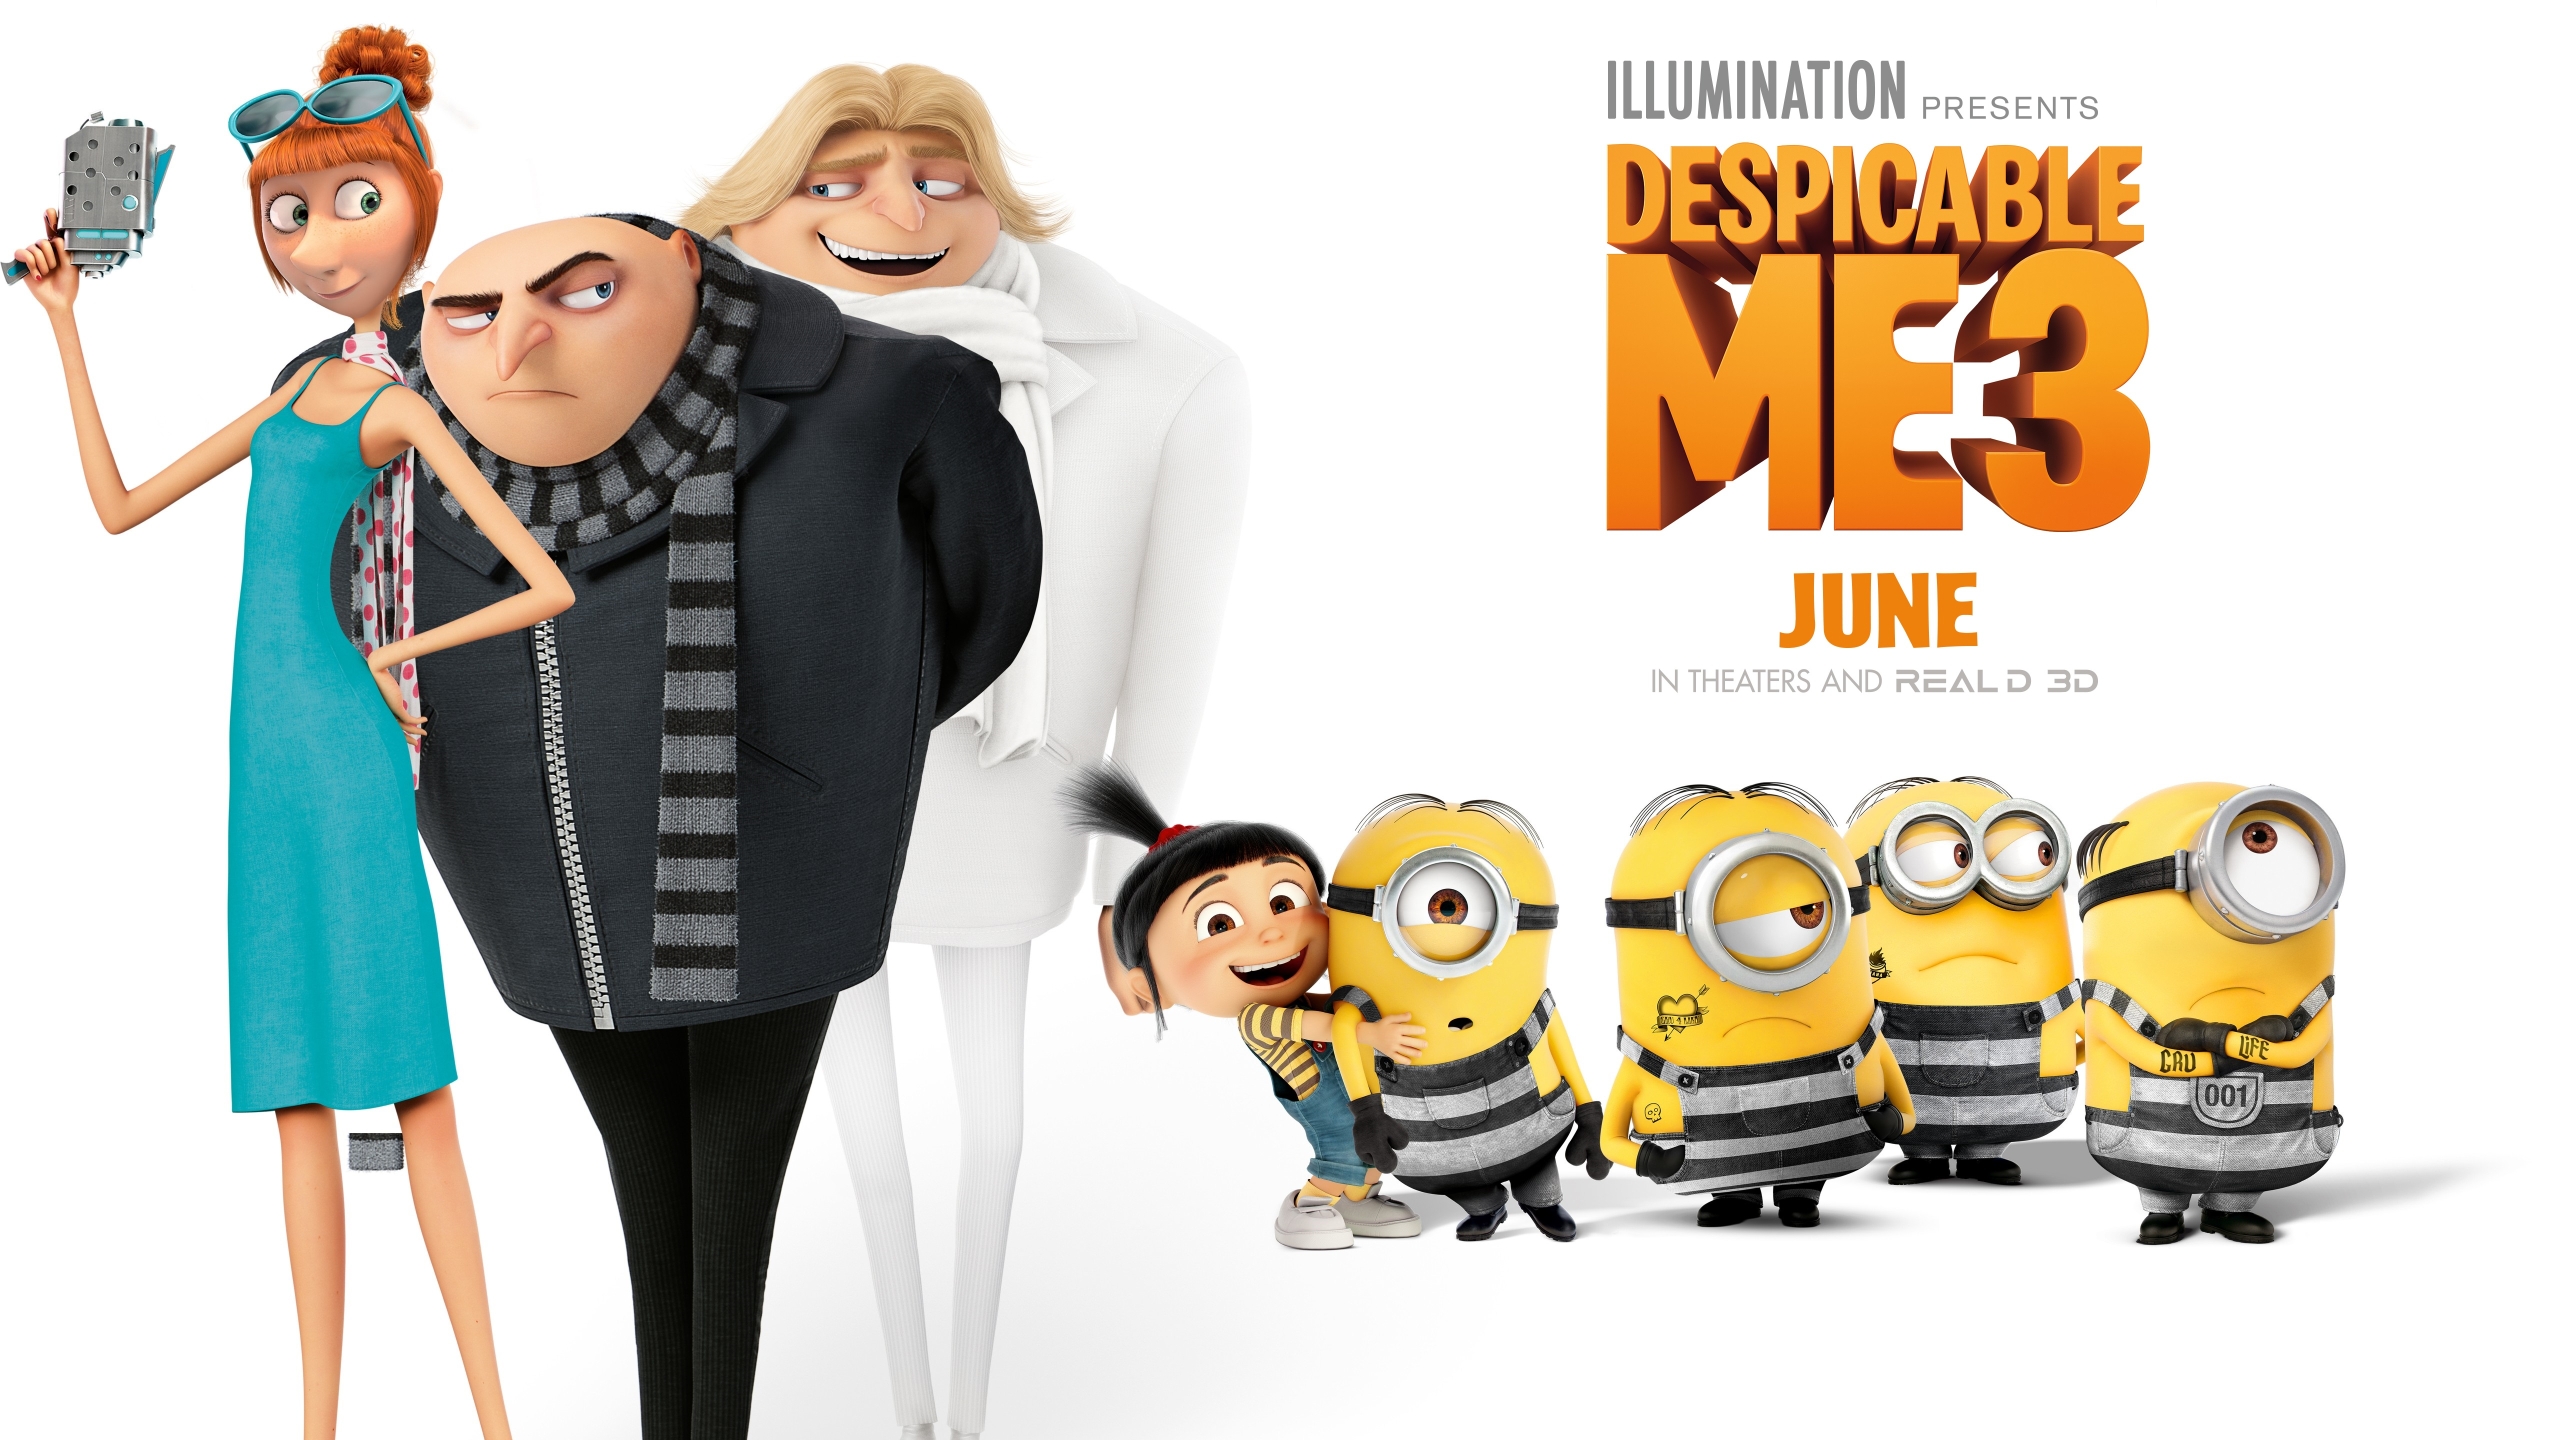 Despicable Me 3 for 2560 x 1440 HDTV resolution